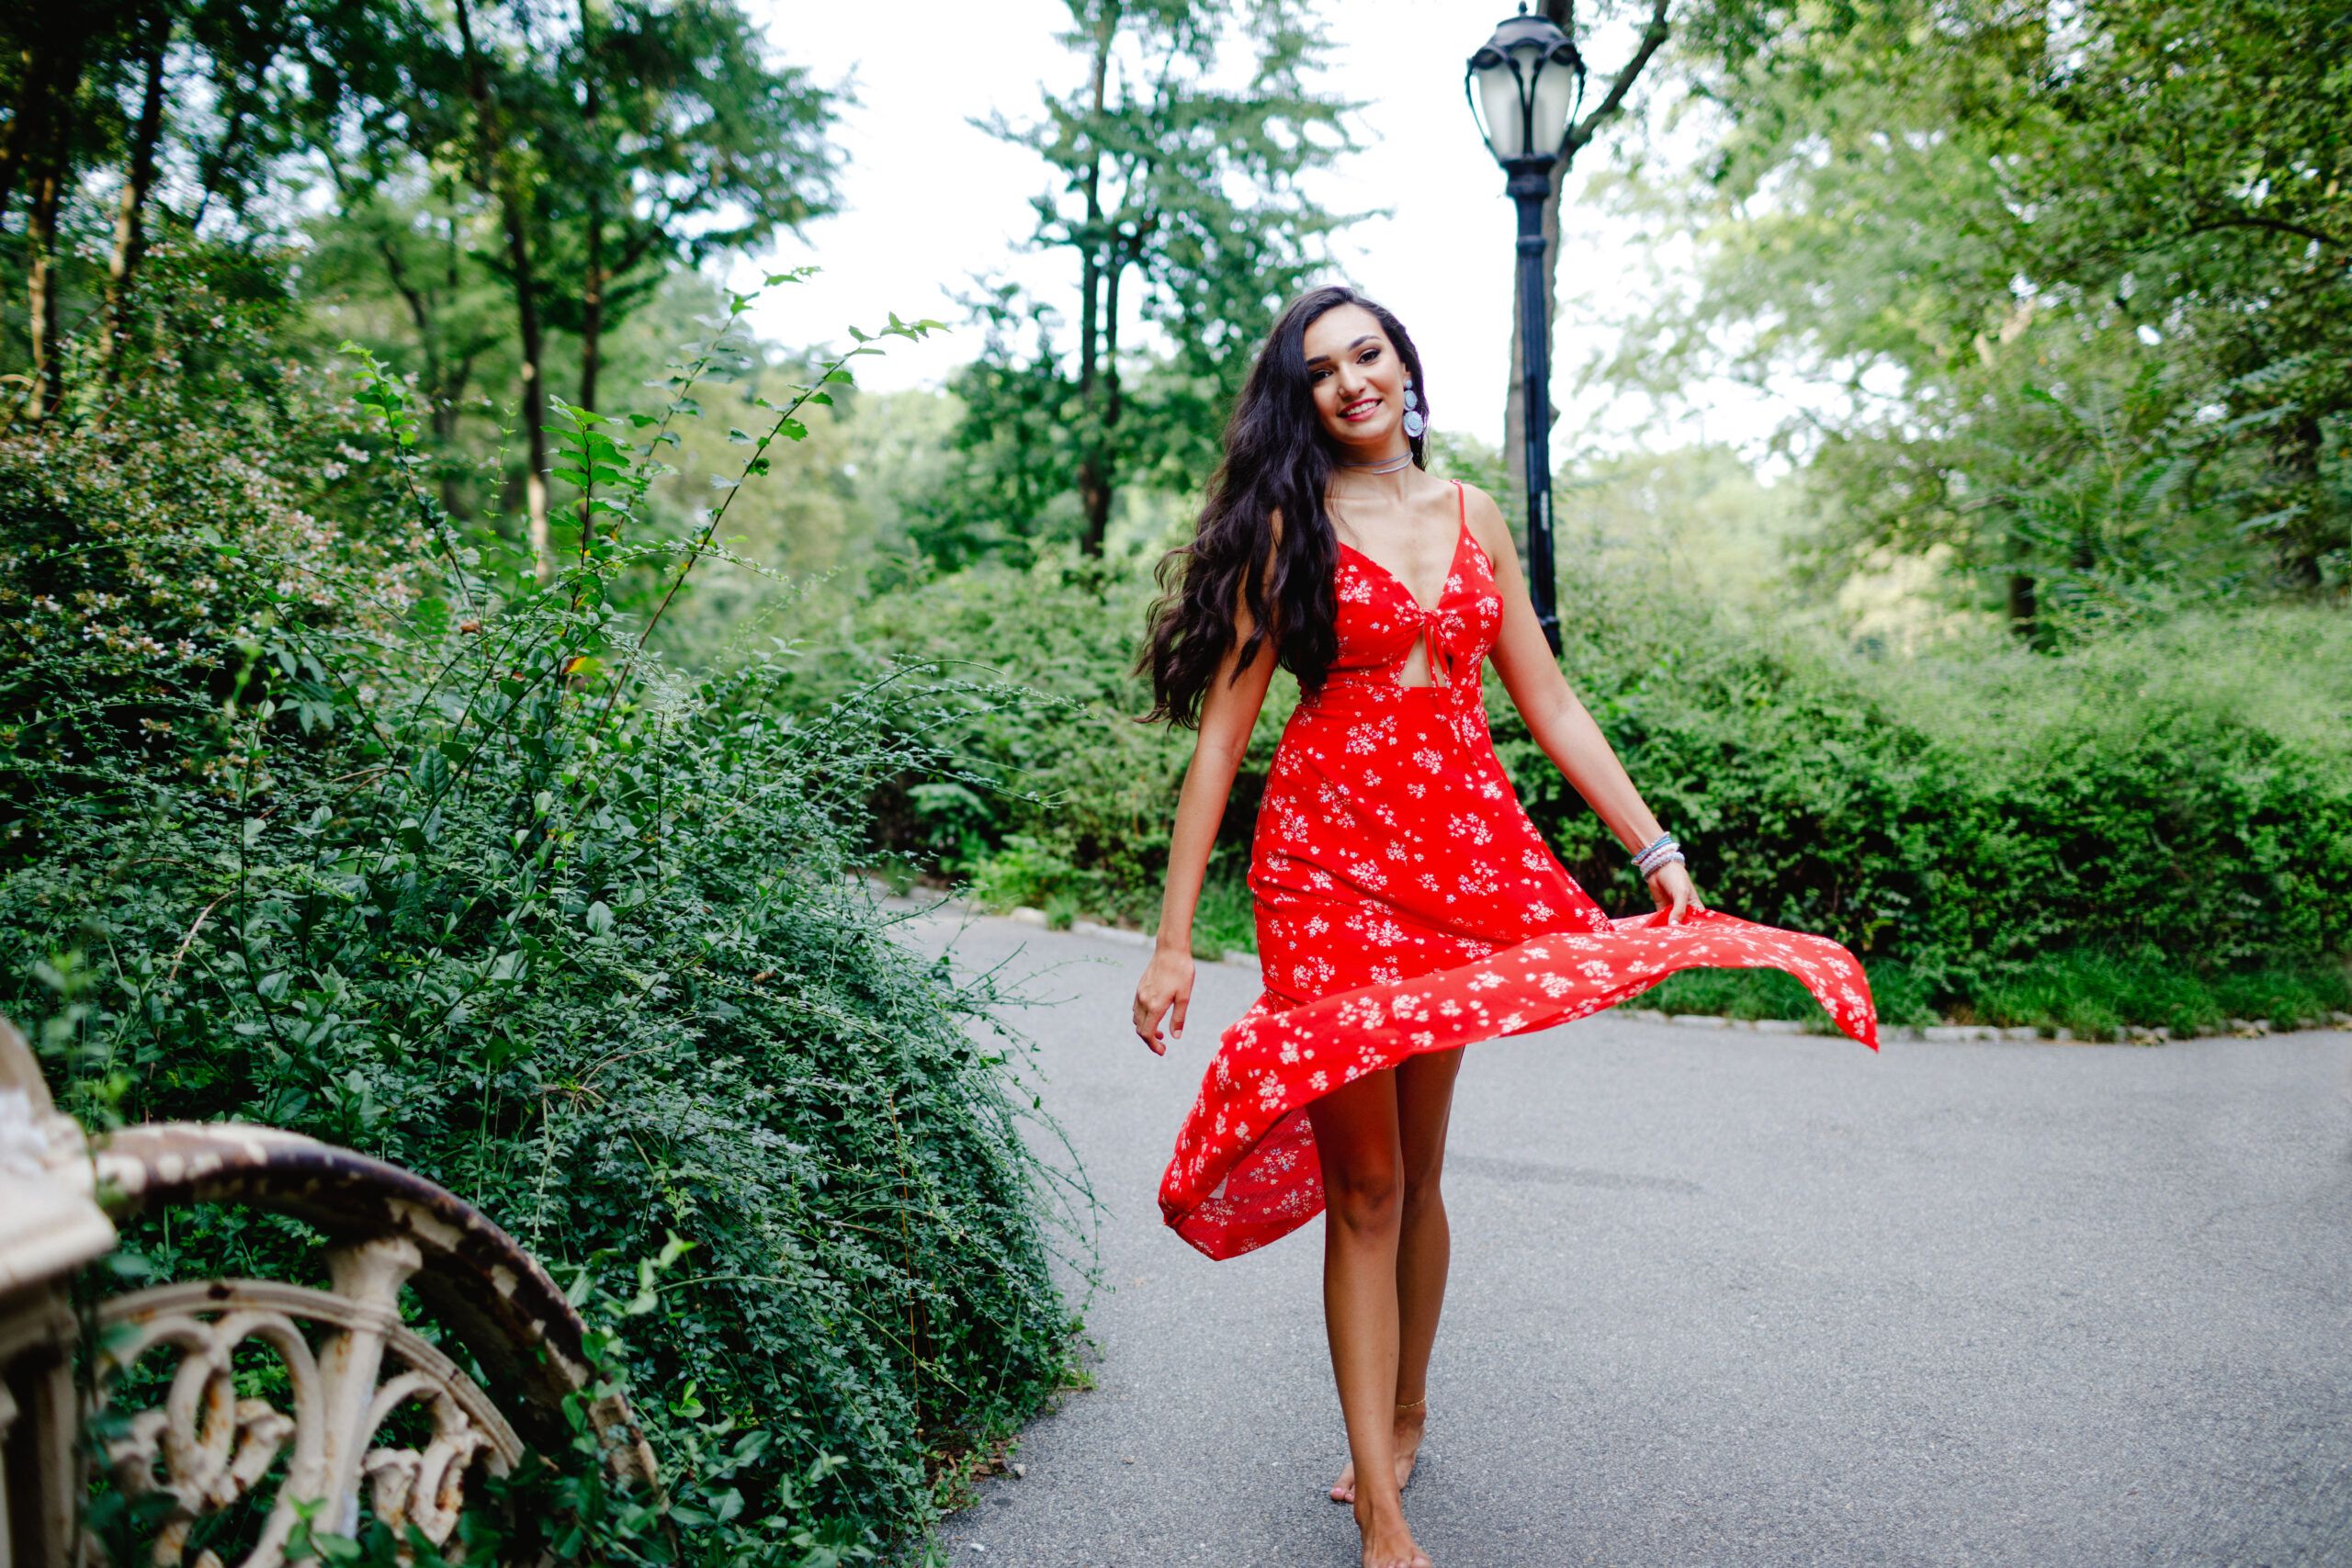 Senior Photo of a Brunette Model with long hair and red lipstick posing in Central Park in a red floral dress walking